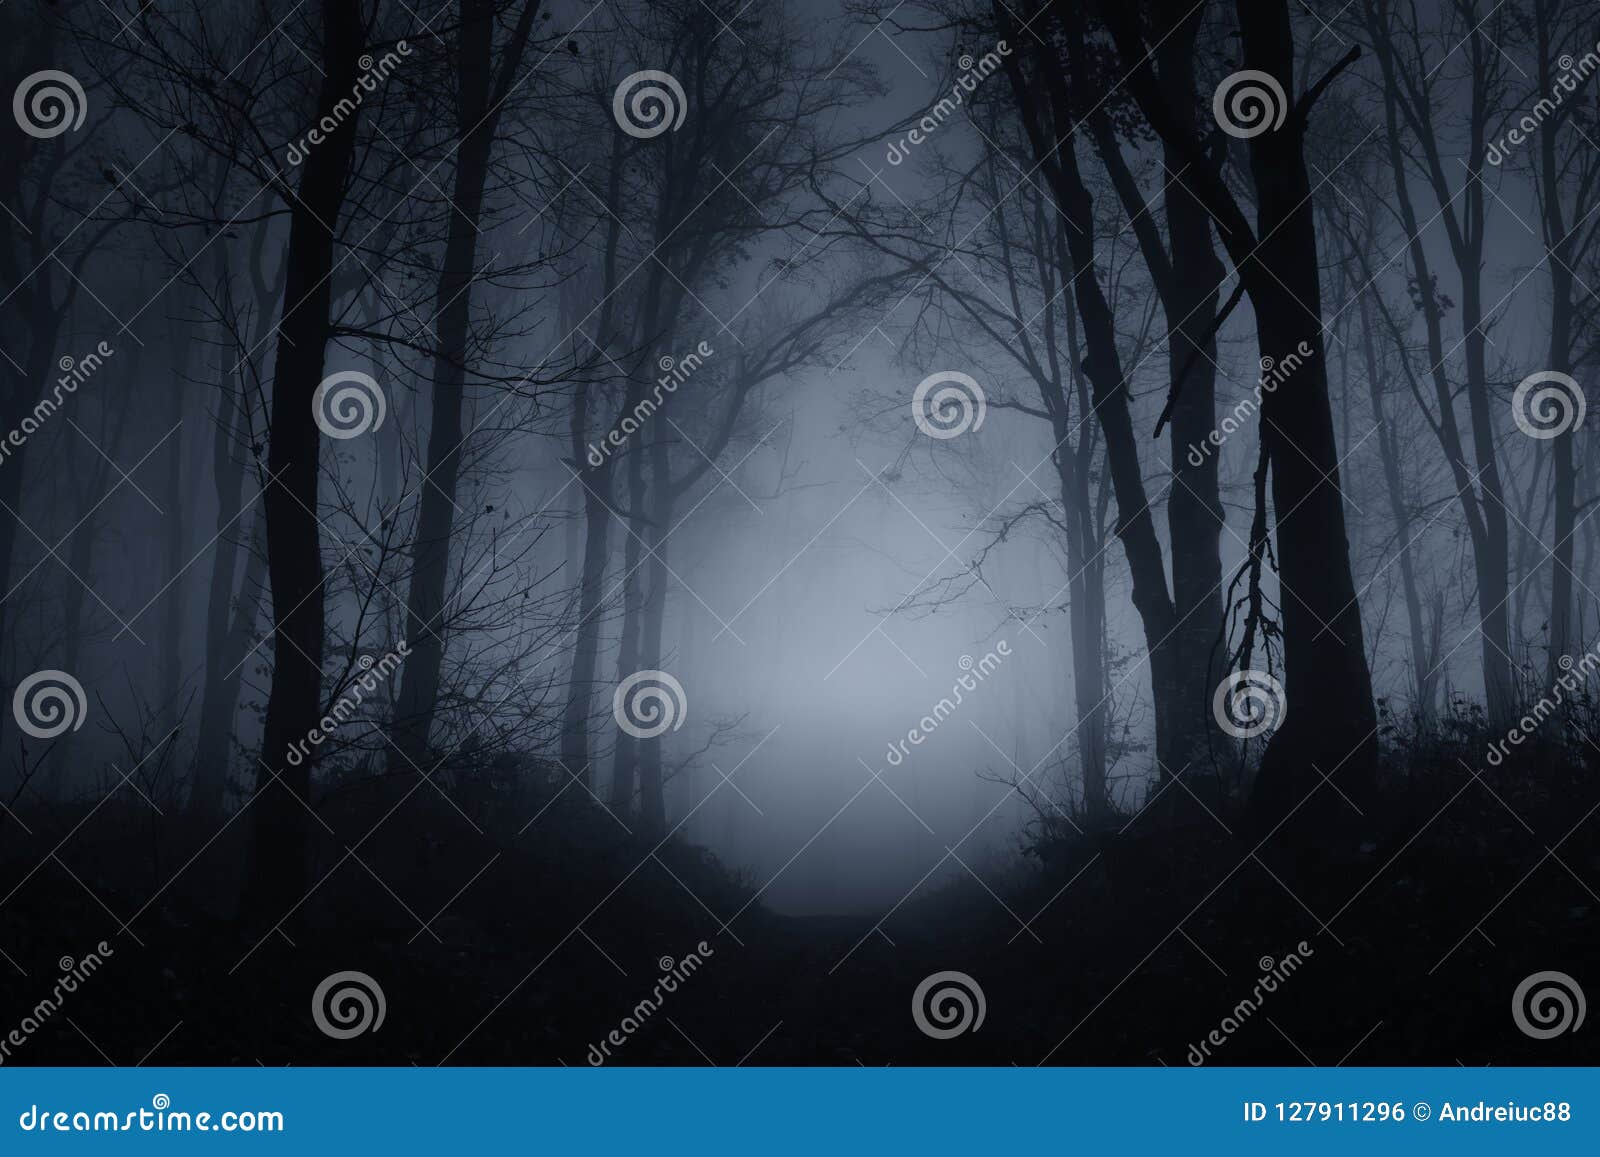 spooky woods at night on halloween